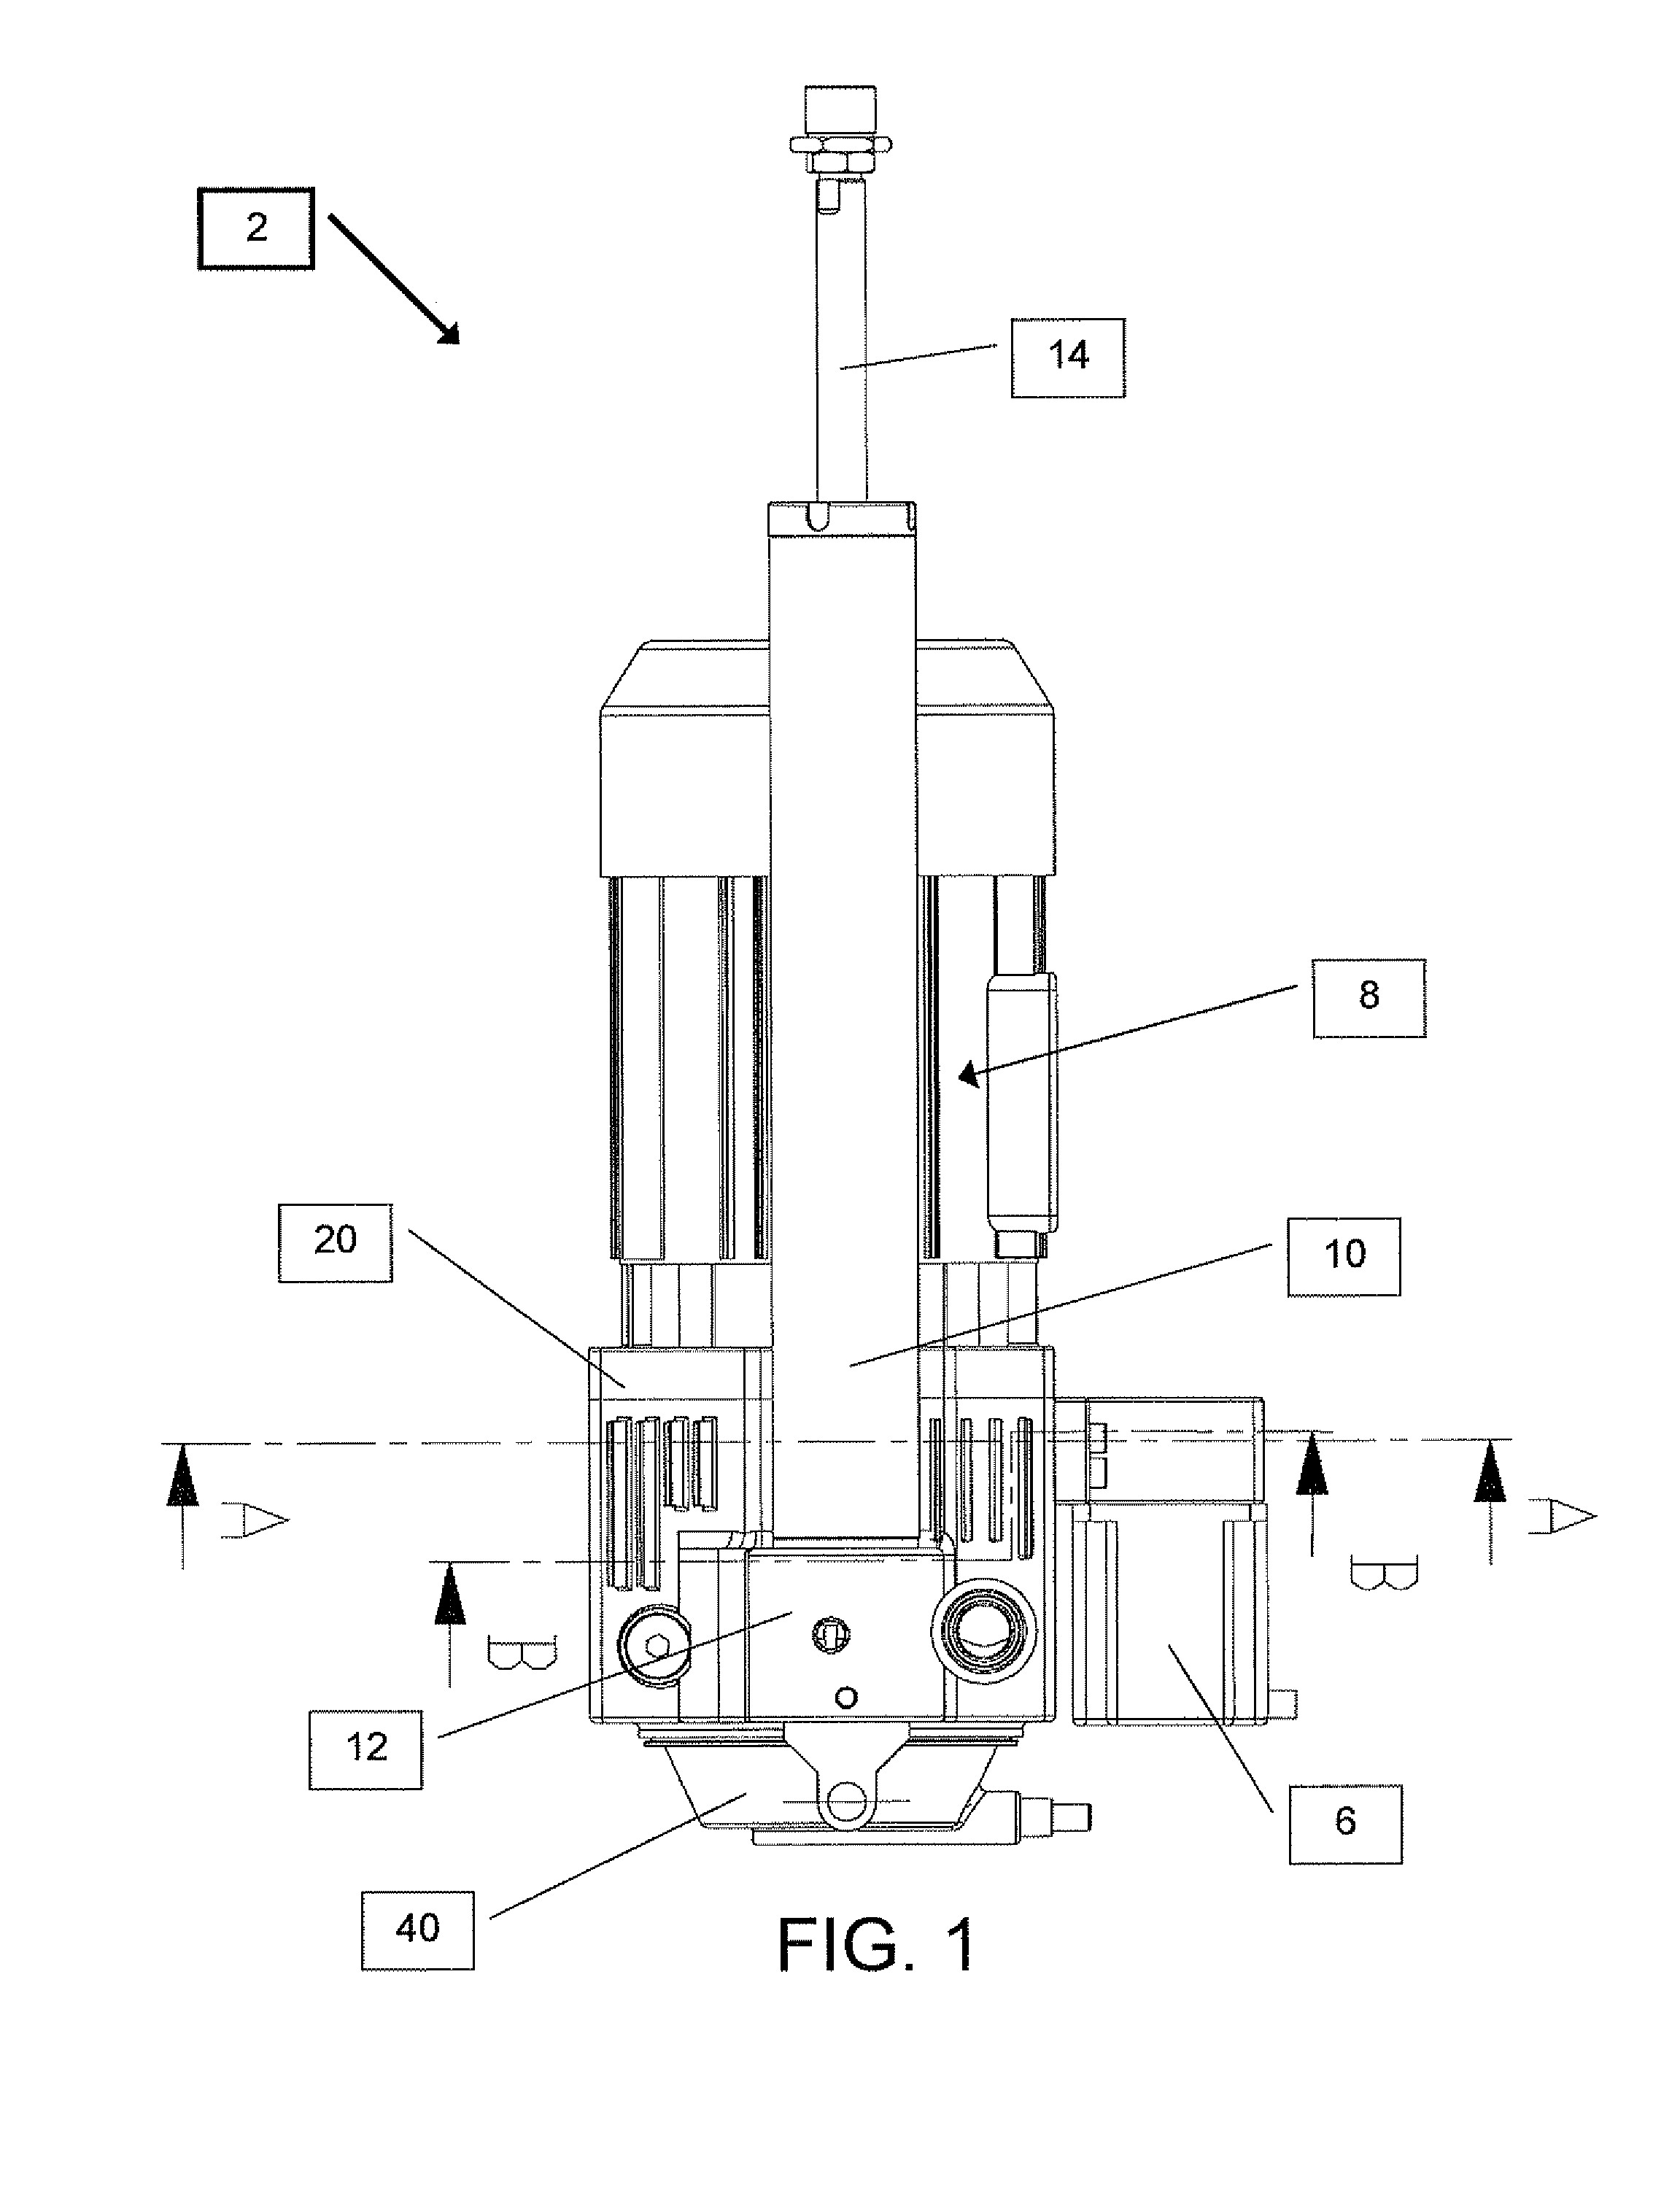 Self-Contained Hydraulic Actuator System